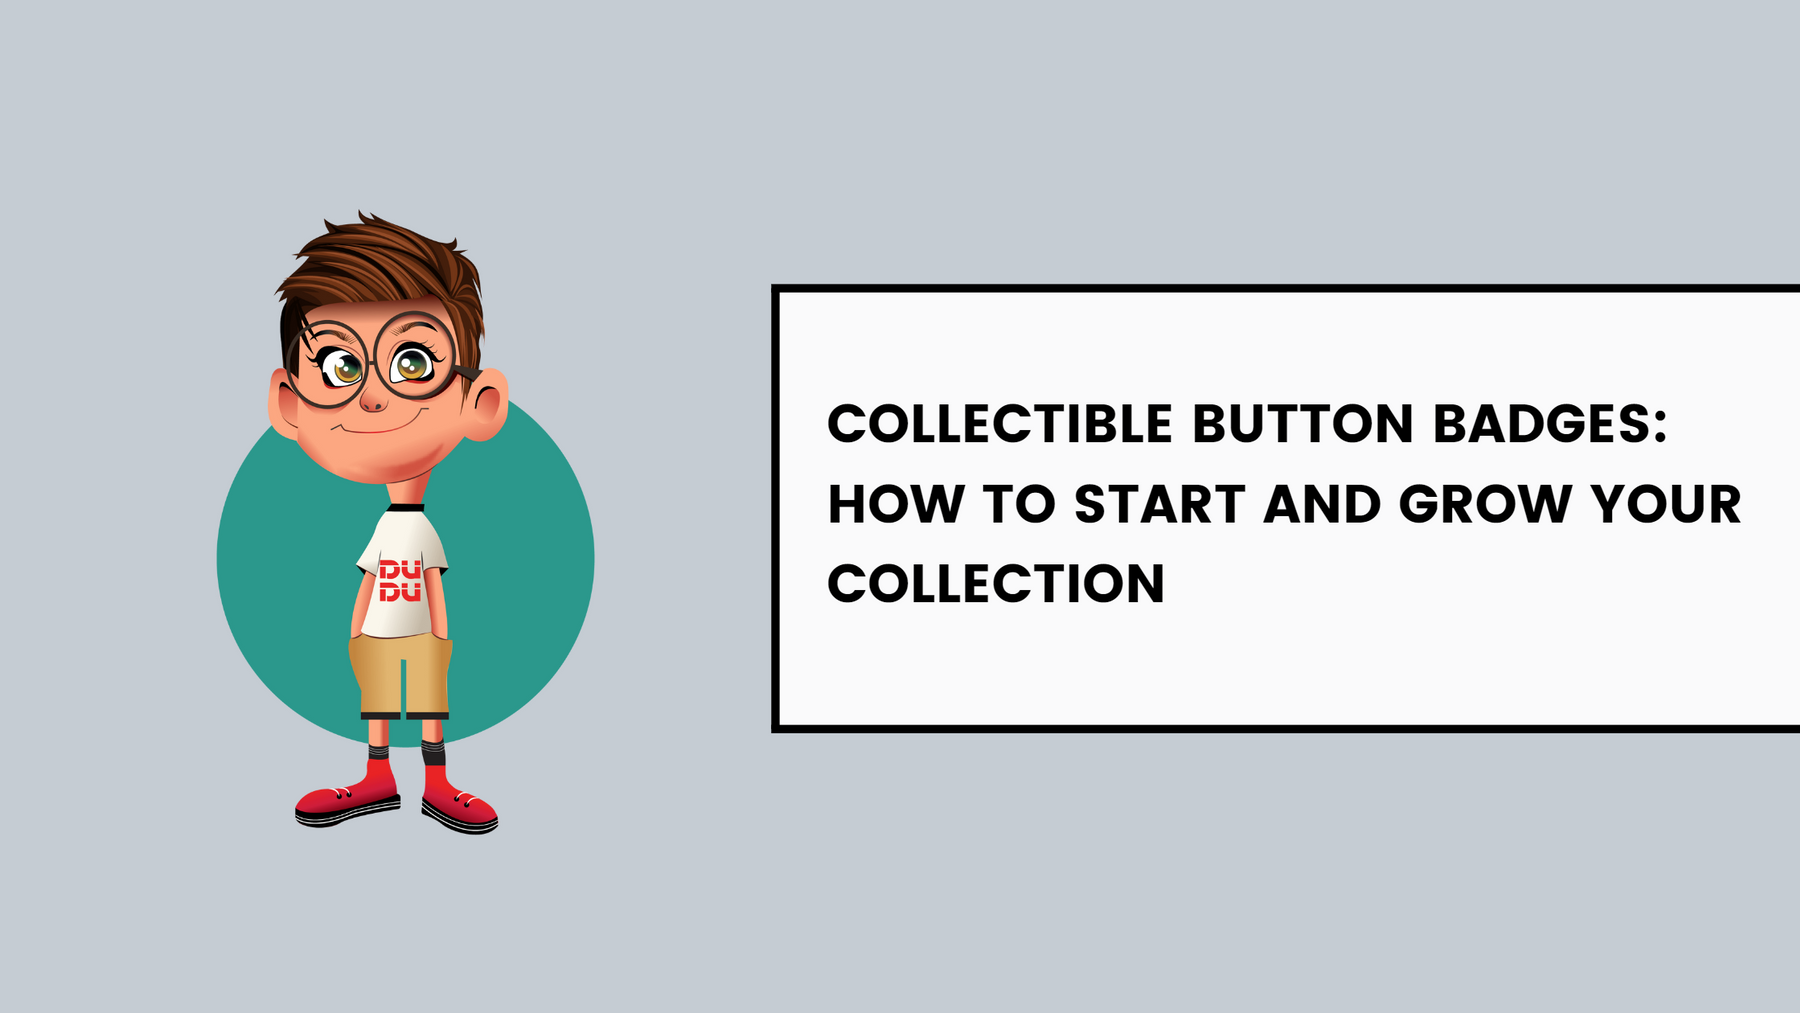 Collectible Button Badges: How To Start And Grow Your Collection